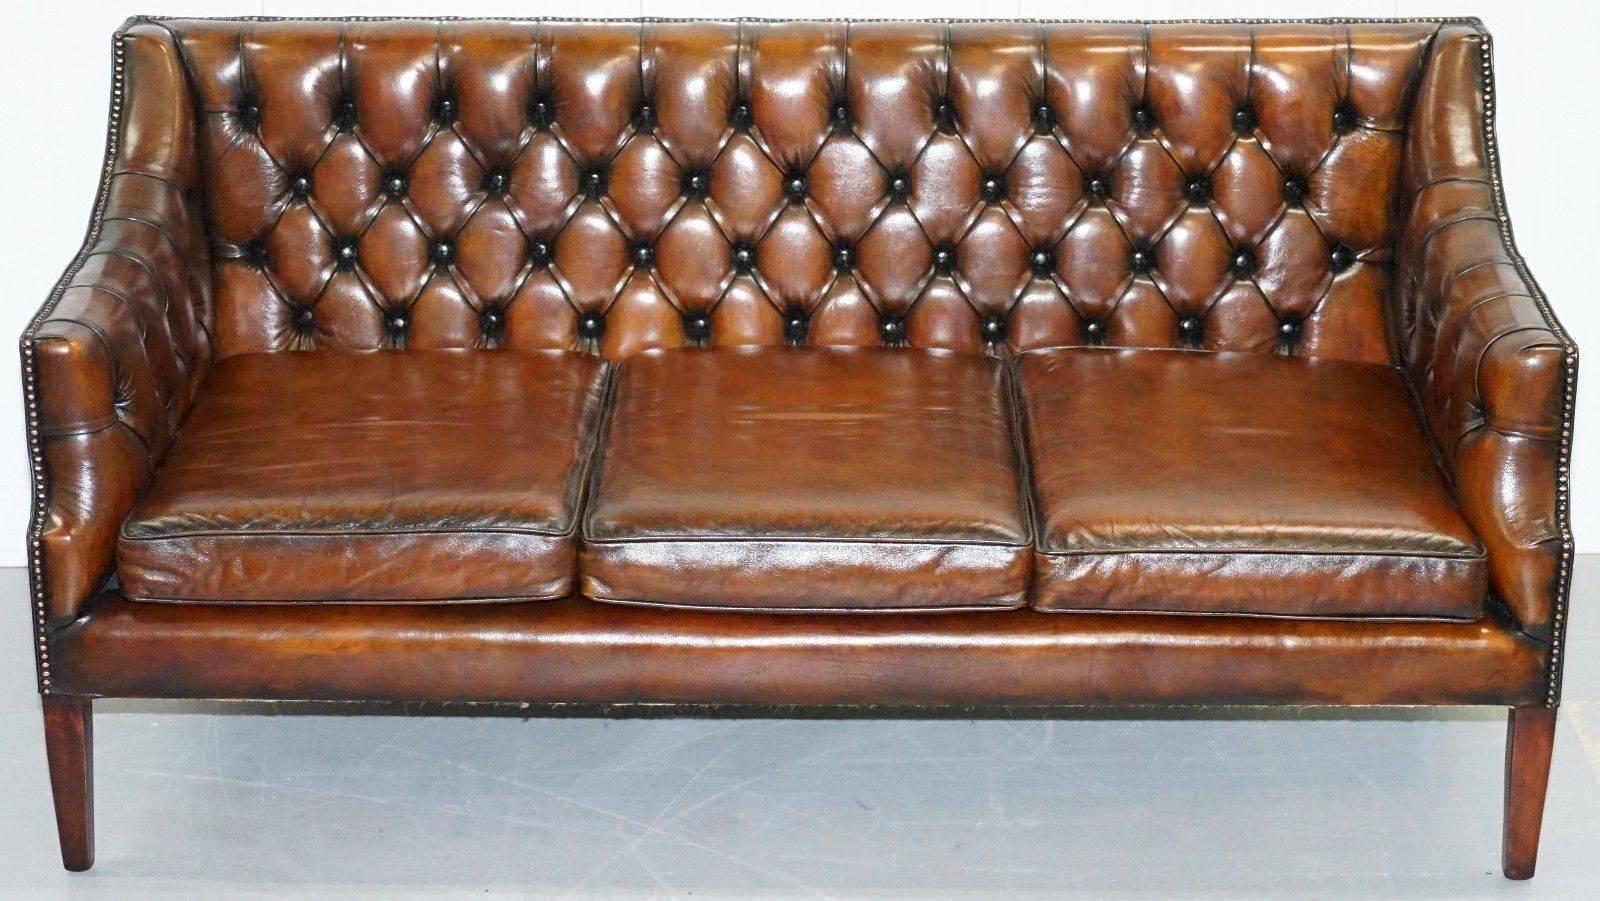 We are delighted to offer for sale this new George Smith Georgian three seater aged whiskey brown leather sofa RRP £12,500

This was custom-made to order with button backs, flat foam cushions and no castors, it can have castors fitted and the